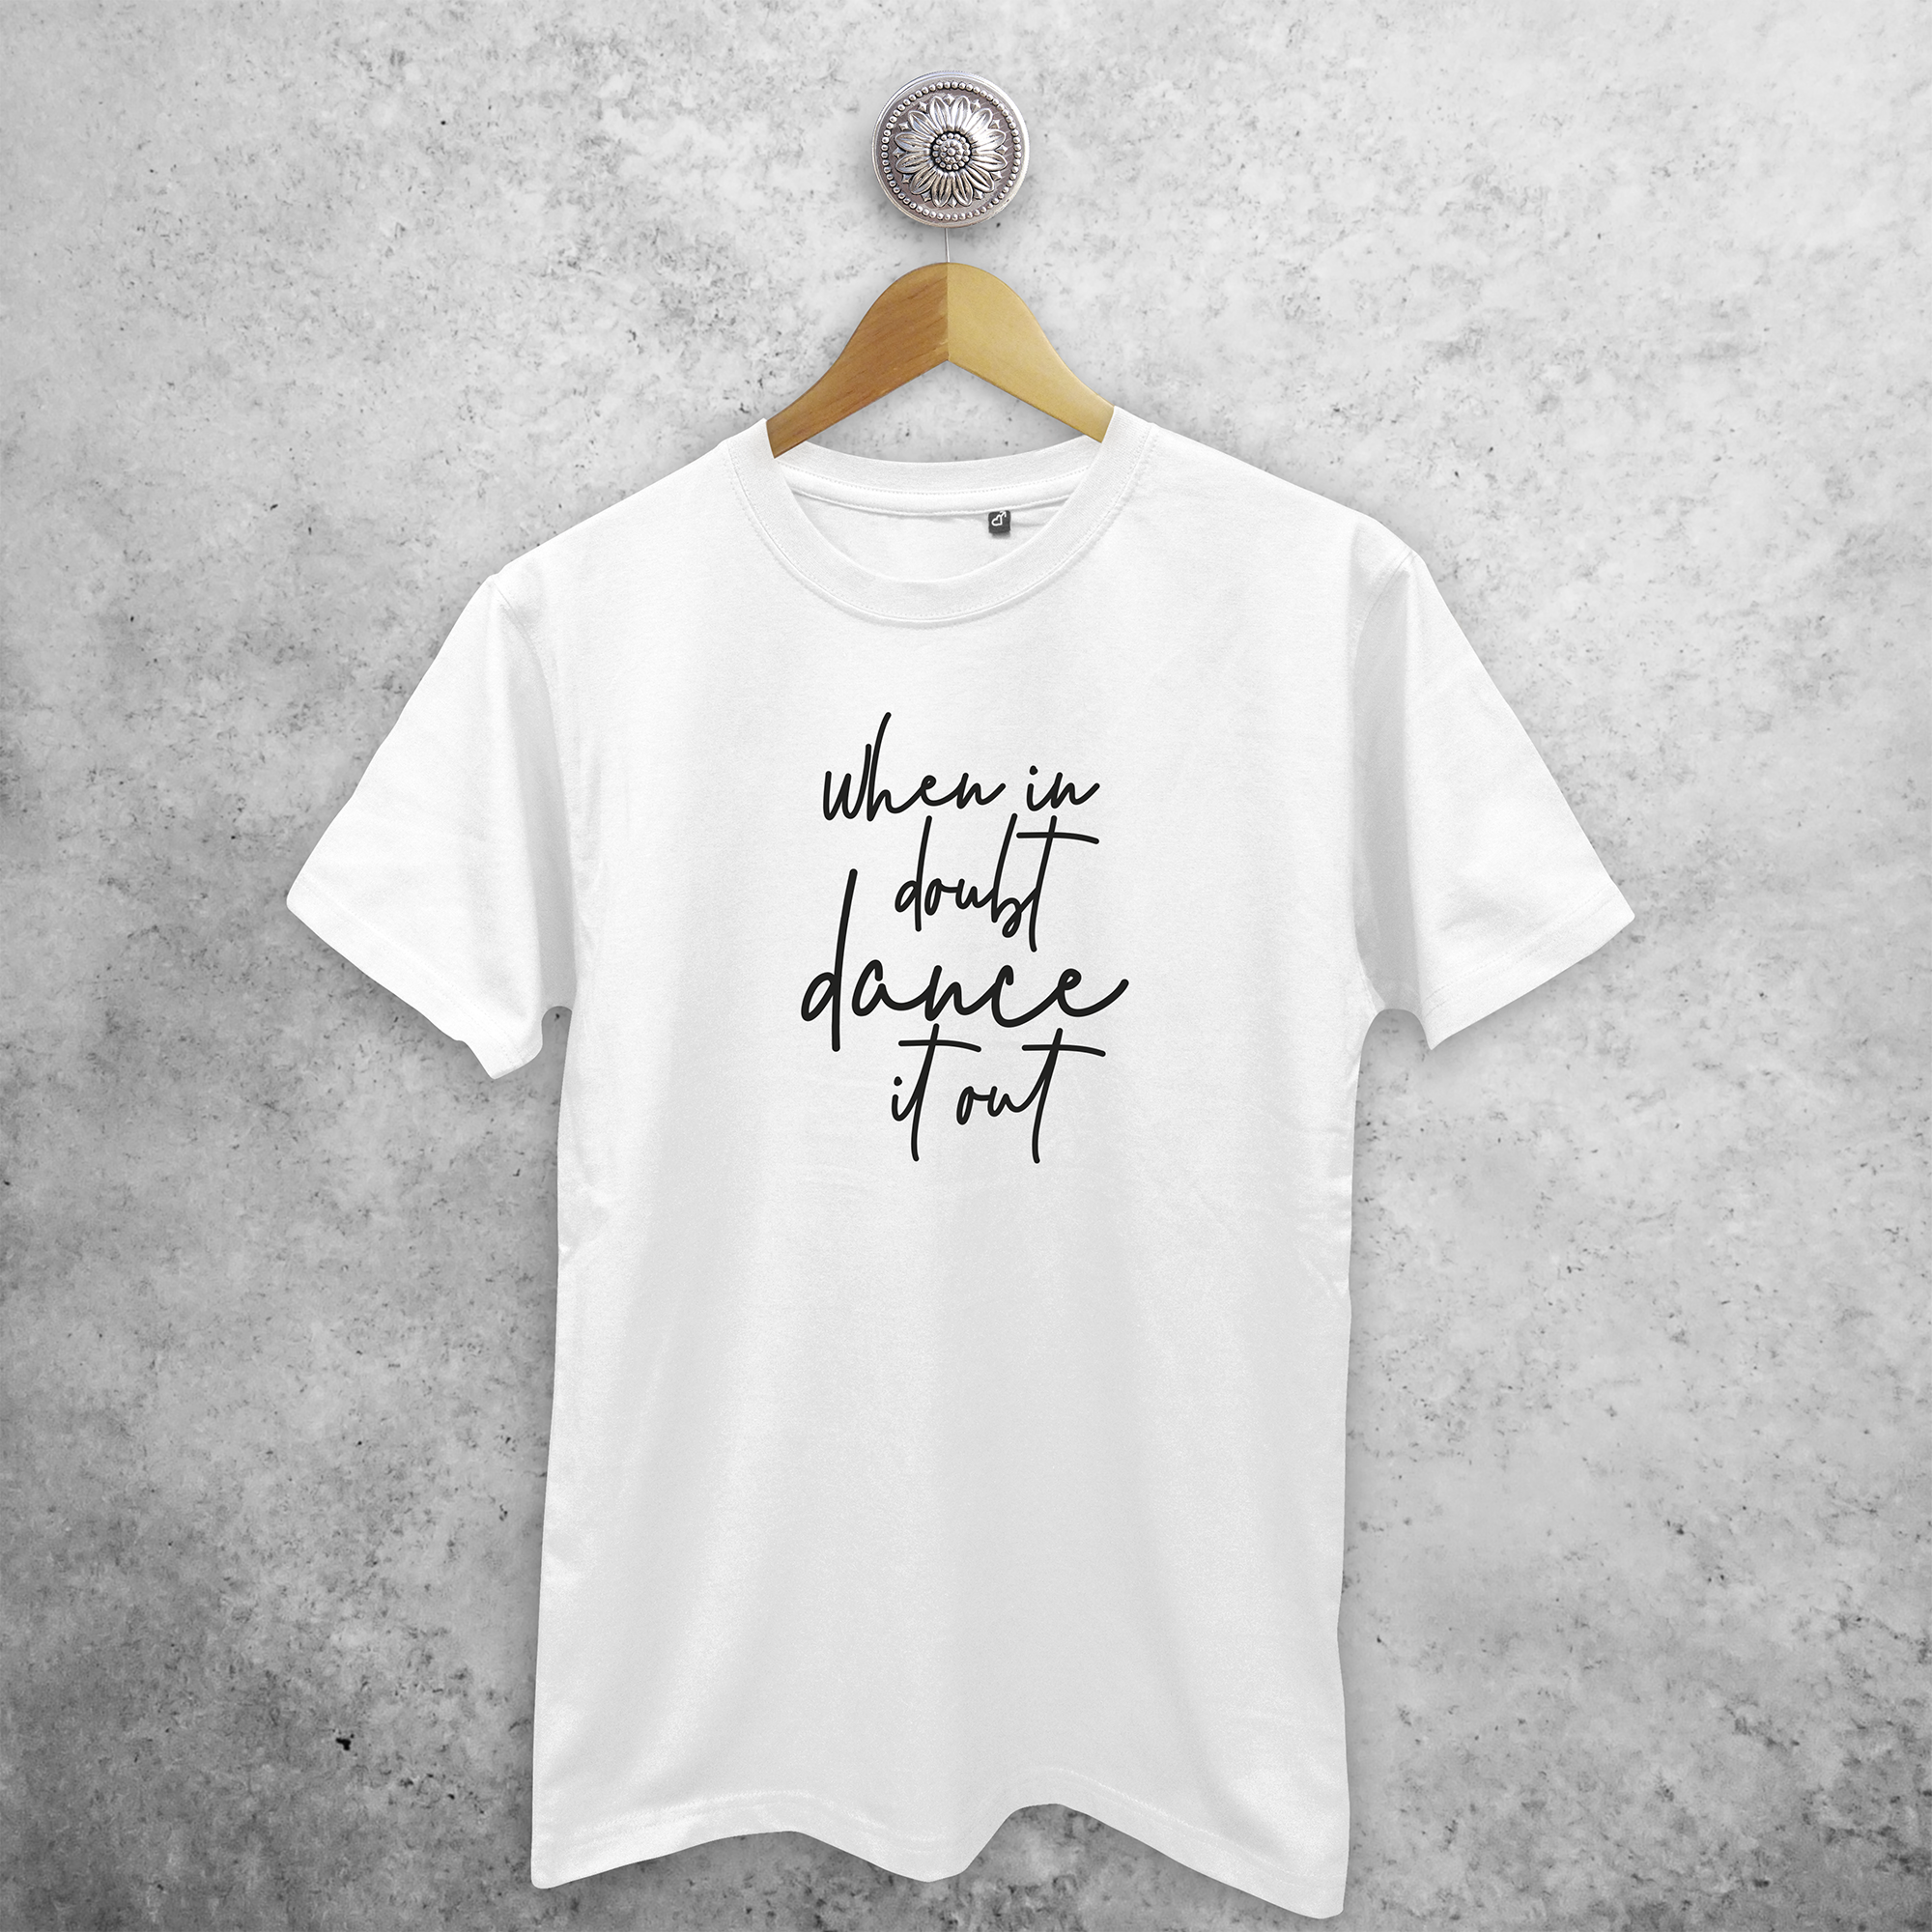 'When in doubt, dance it out' volwassene shirt